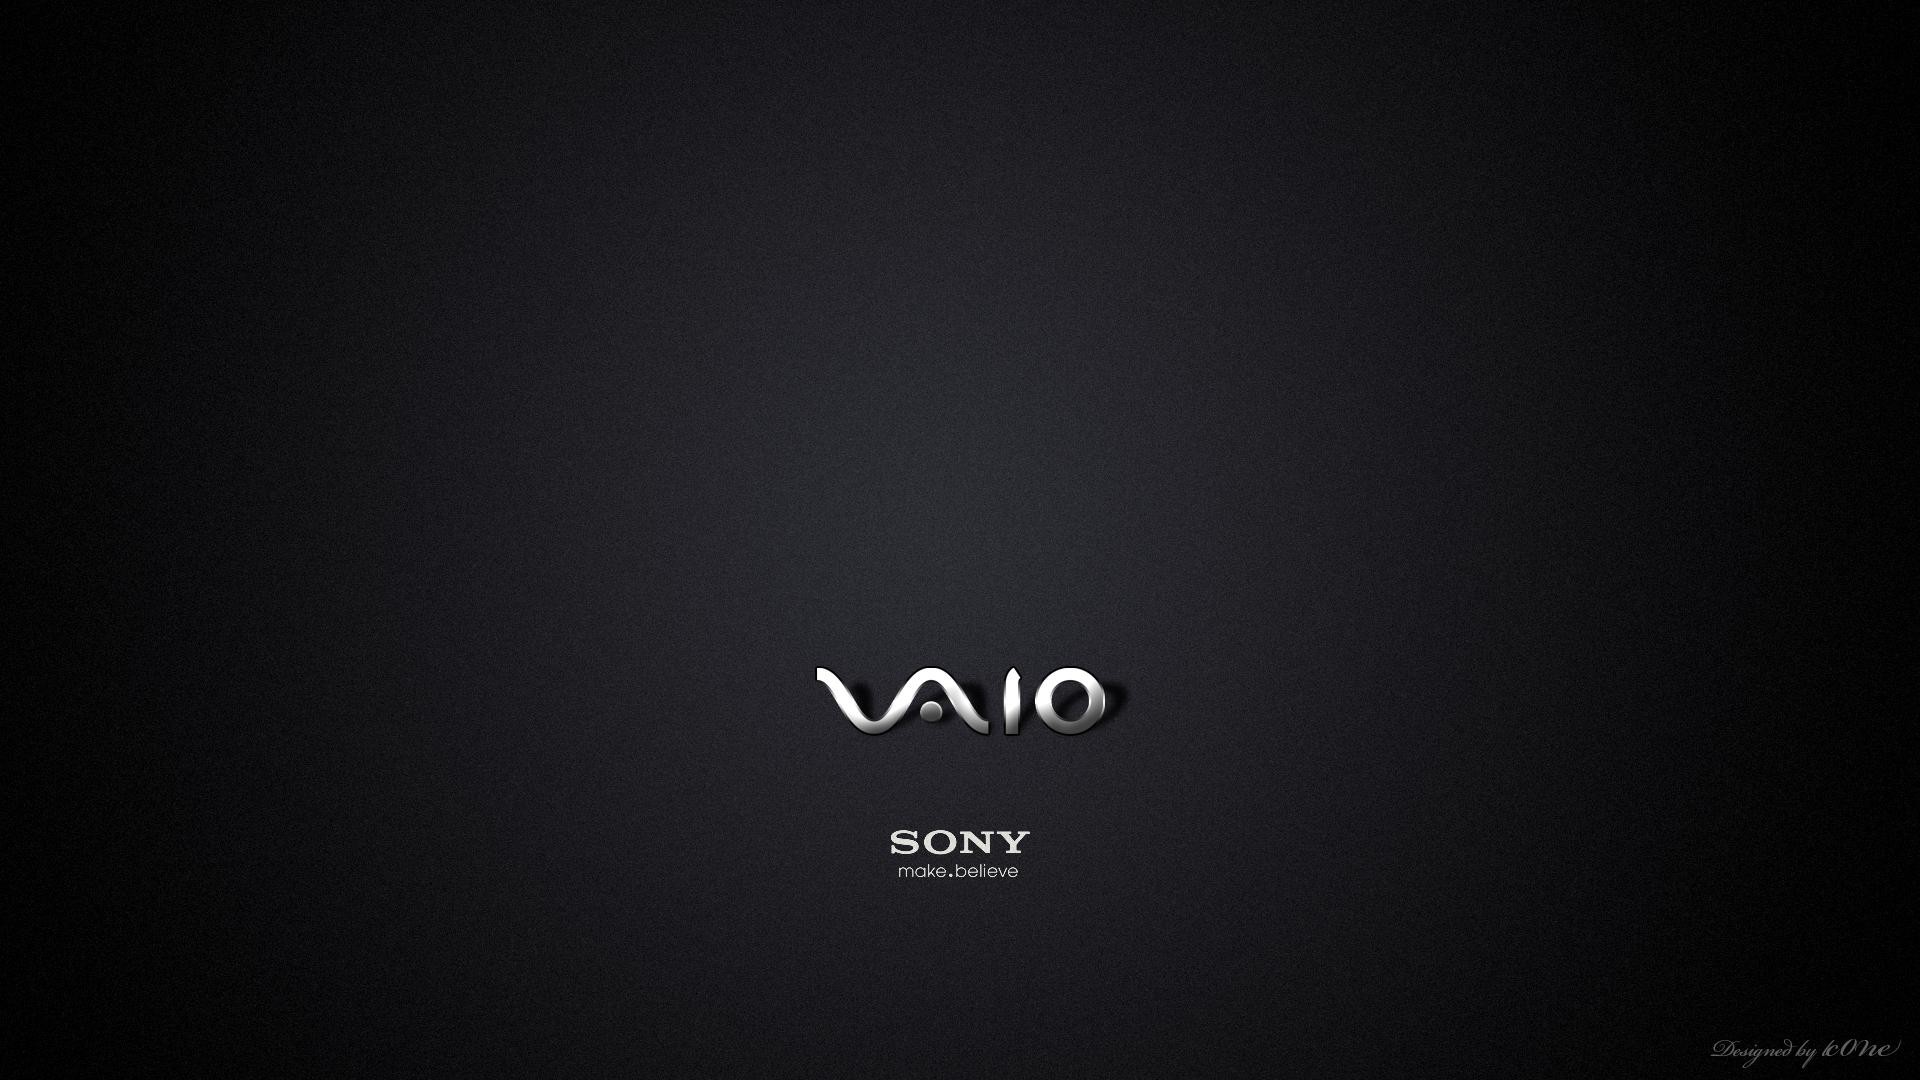 Sony Vaio Wallpaper 4K - 82 sony hd wallpapers images in full hd, 2k ...